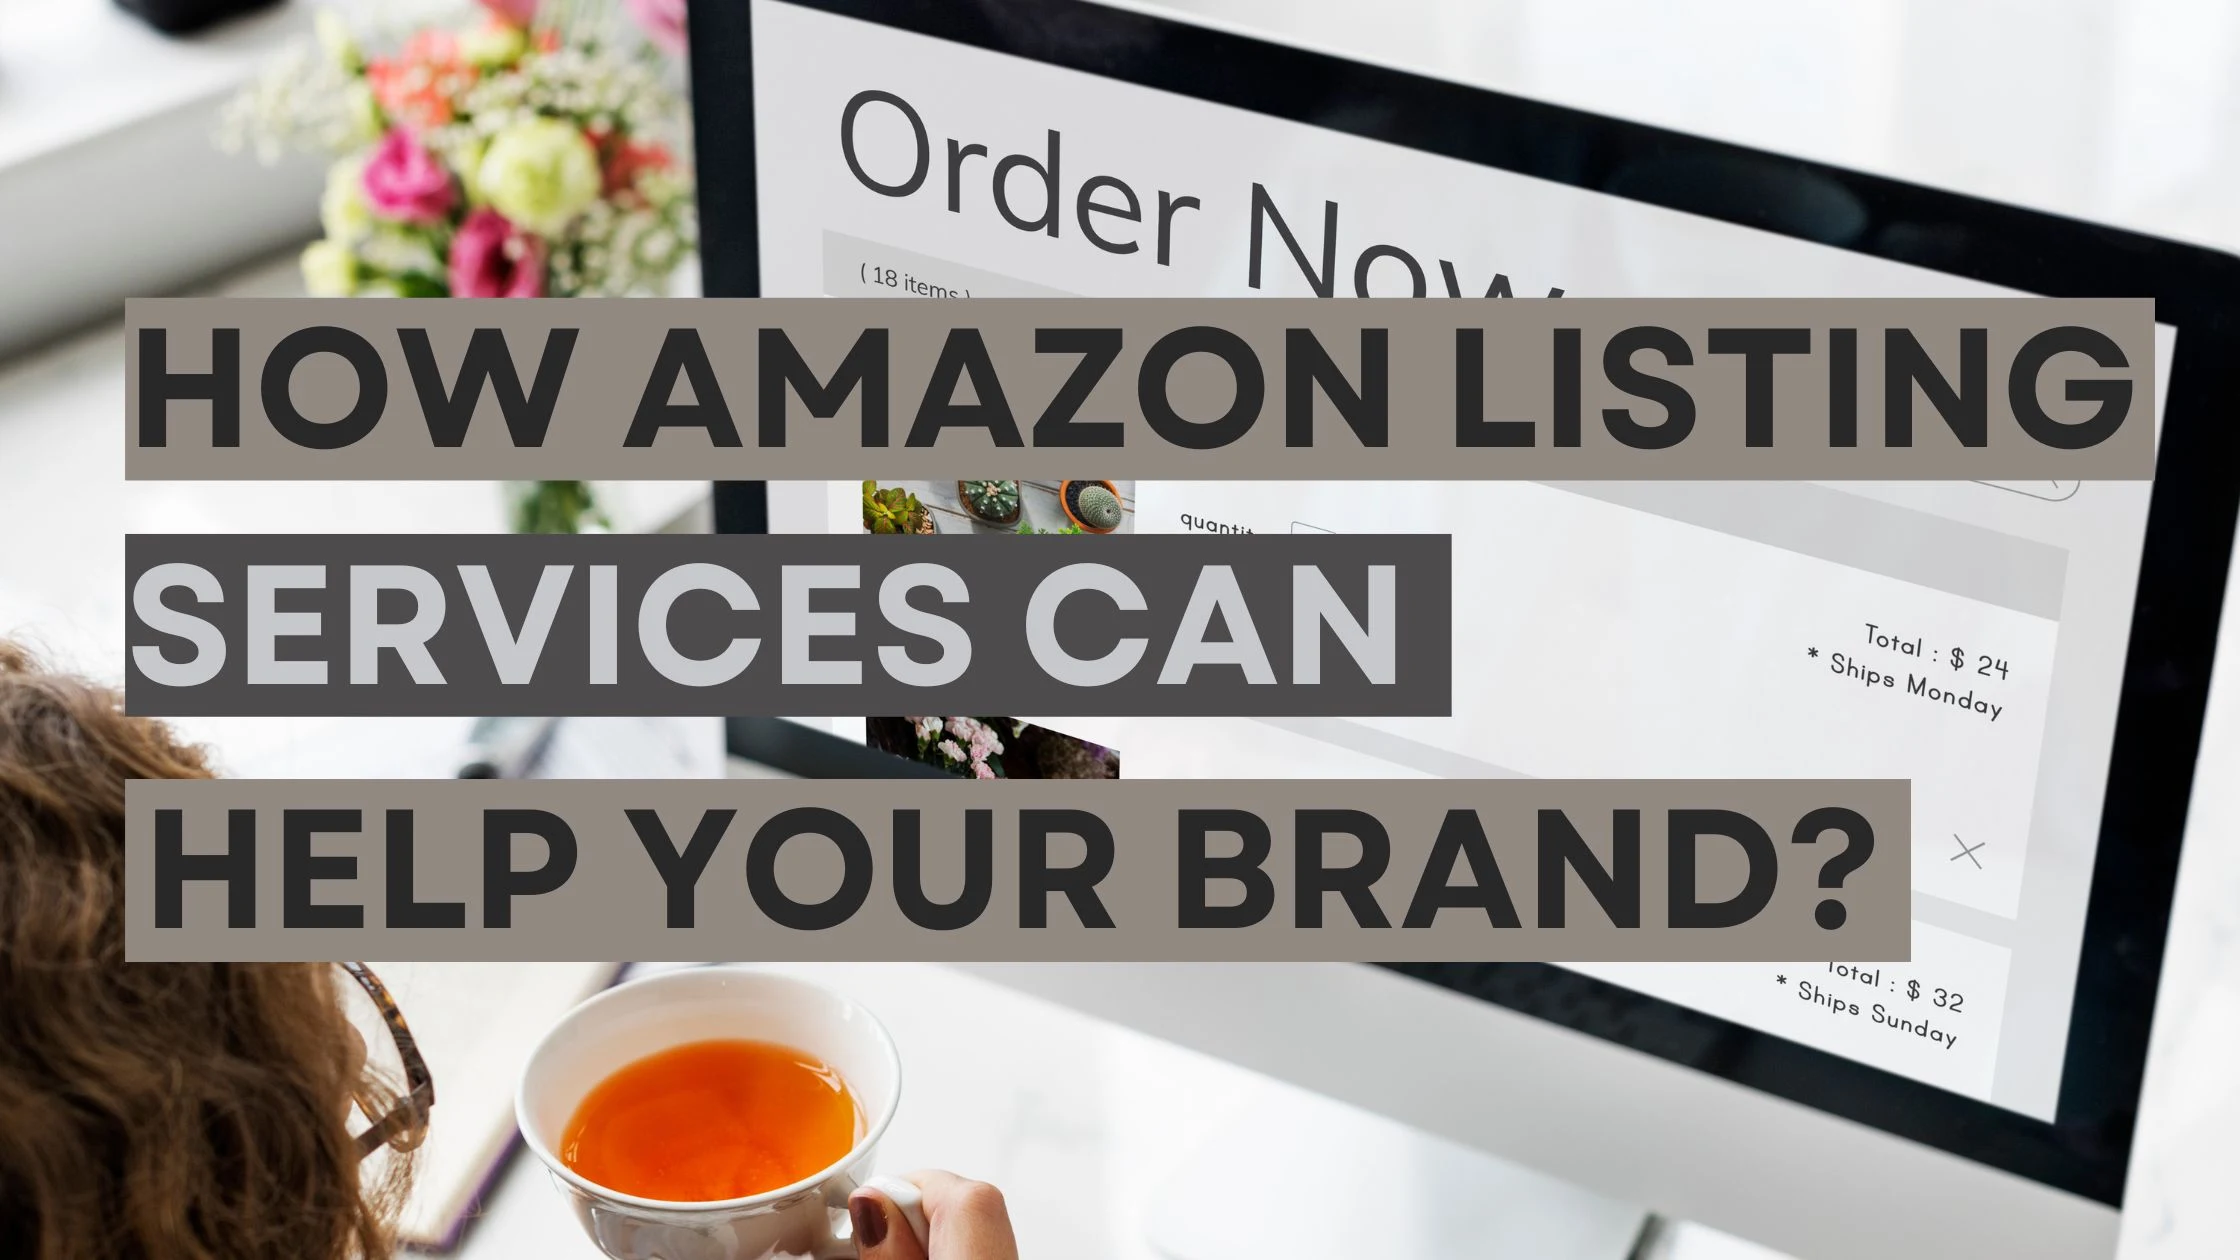 How Amazon Listing Services Can Help Your Brand?